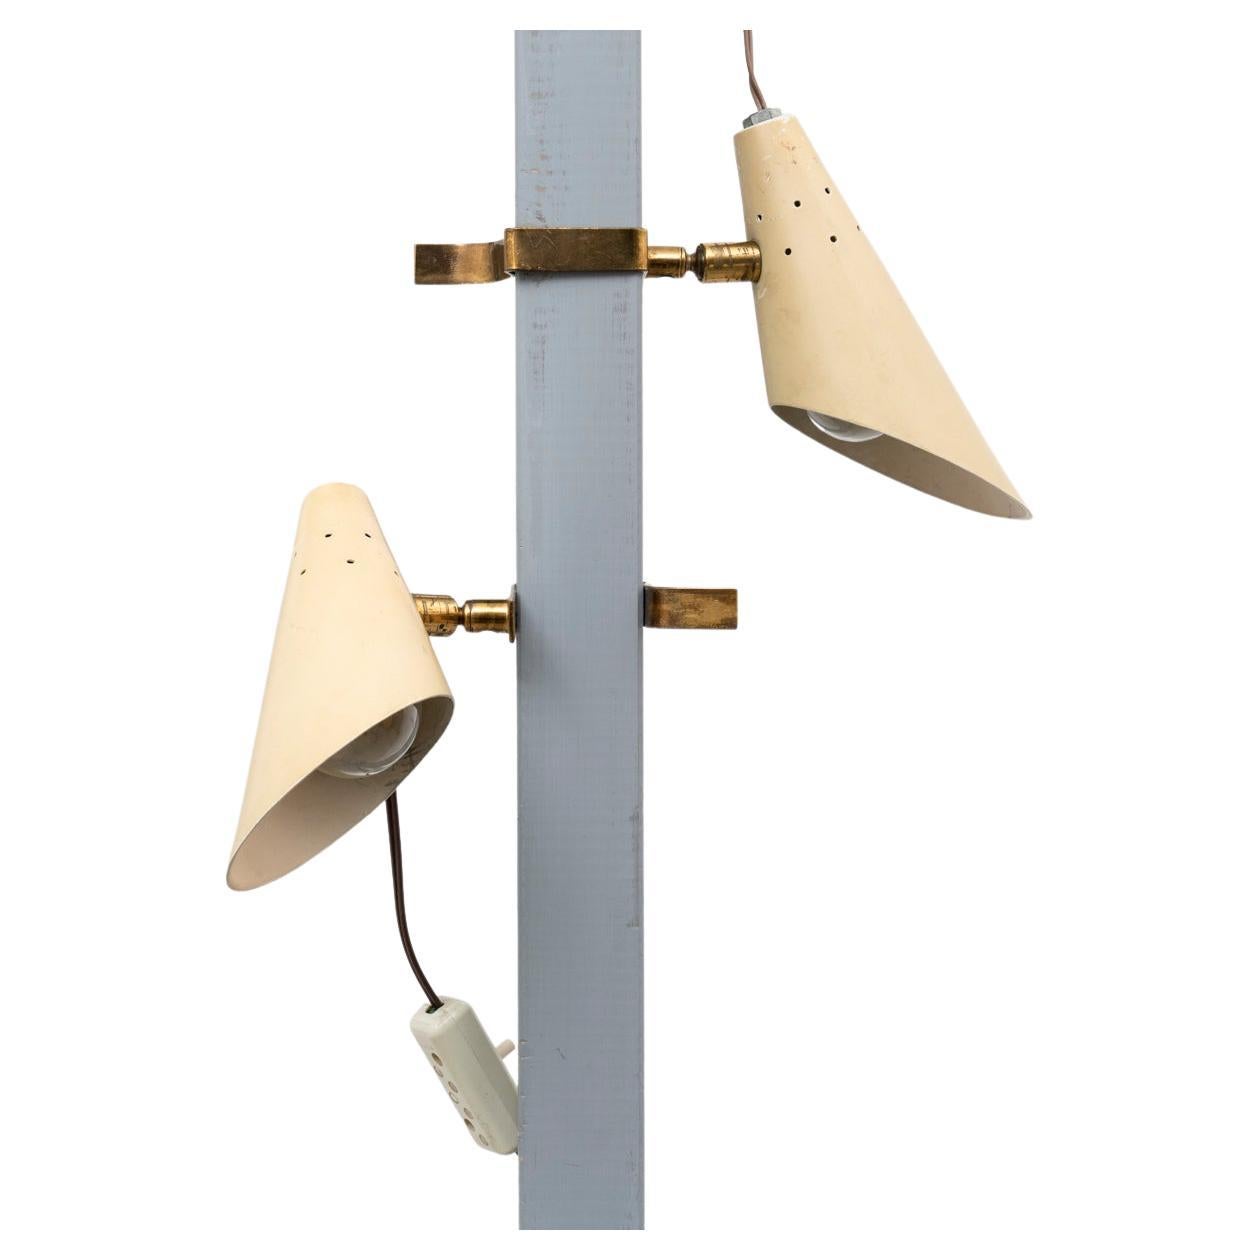 Stilux Milano Pair of Brass Clamp Sconces, 1950s For Sale